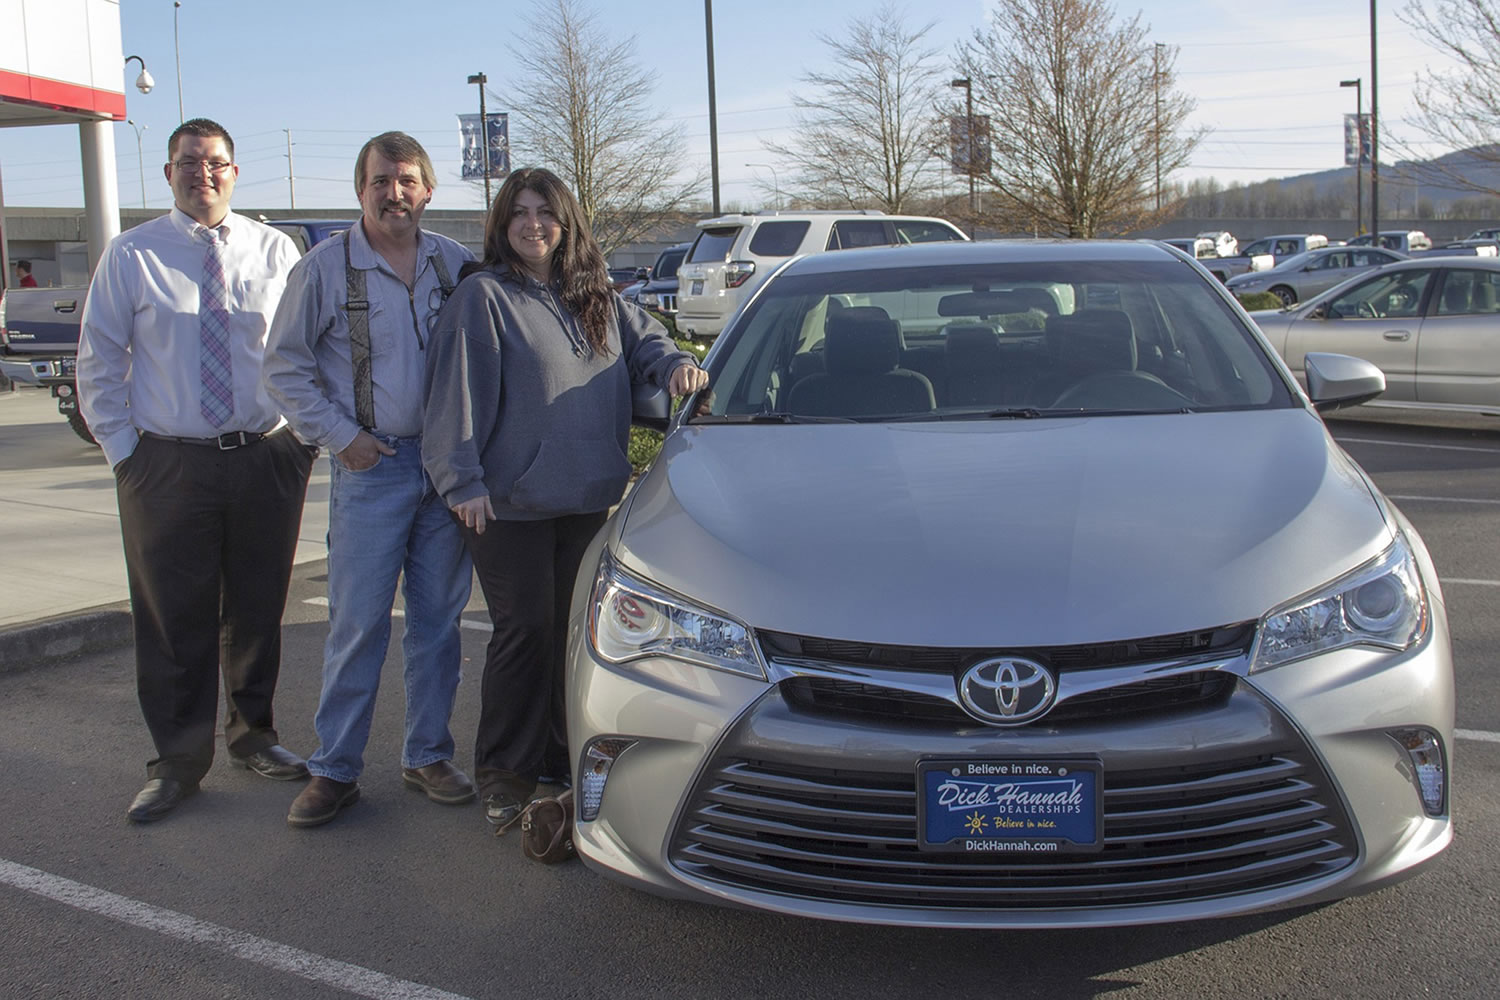 East Vancouver: Mary Brown and her son David Cox, center, picked up a 2015 Toyota Camry they won through Dick Hannah Dealerships' &quot;Keys to our Heart&quot; raffle, which raised $87,500 for the Children's Cancer Association.